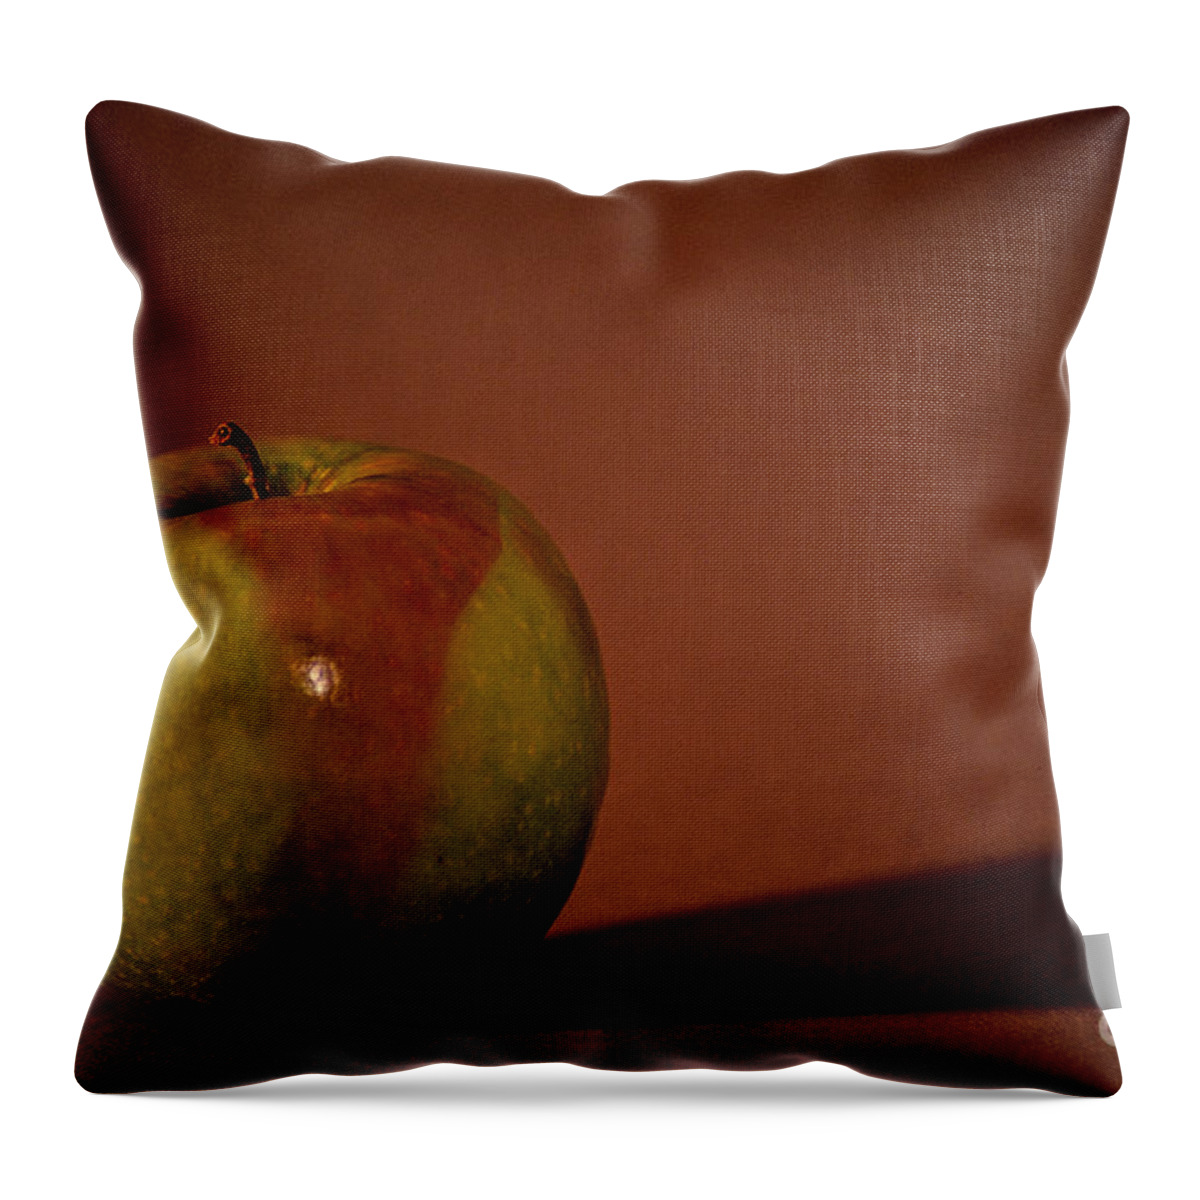 Apple Throw Pillow featuring the photograph Granny Smith by Sharon Elliott